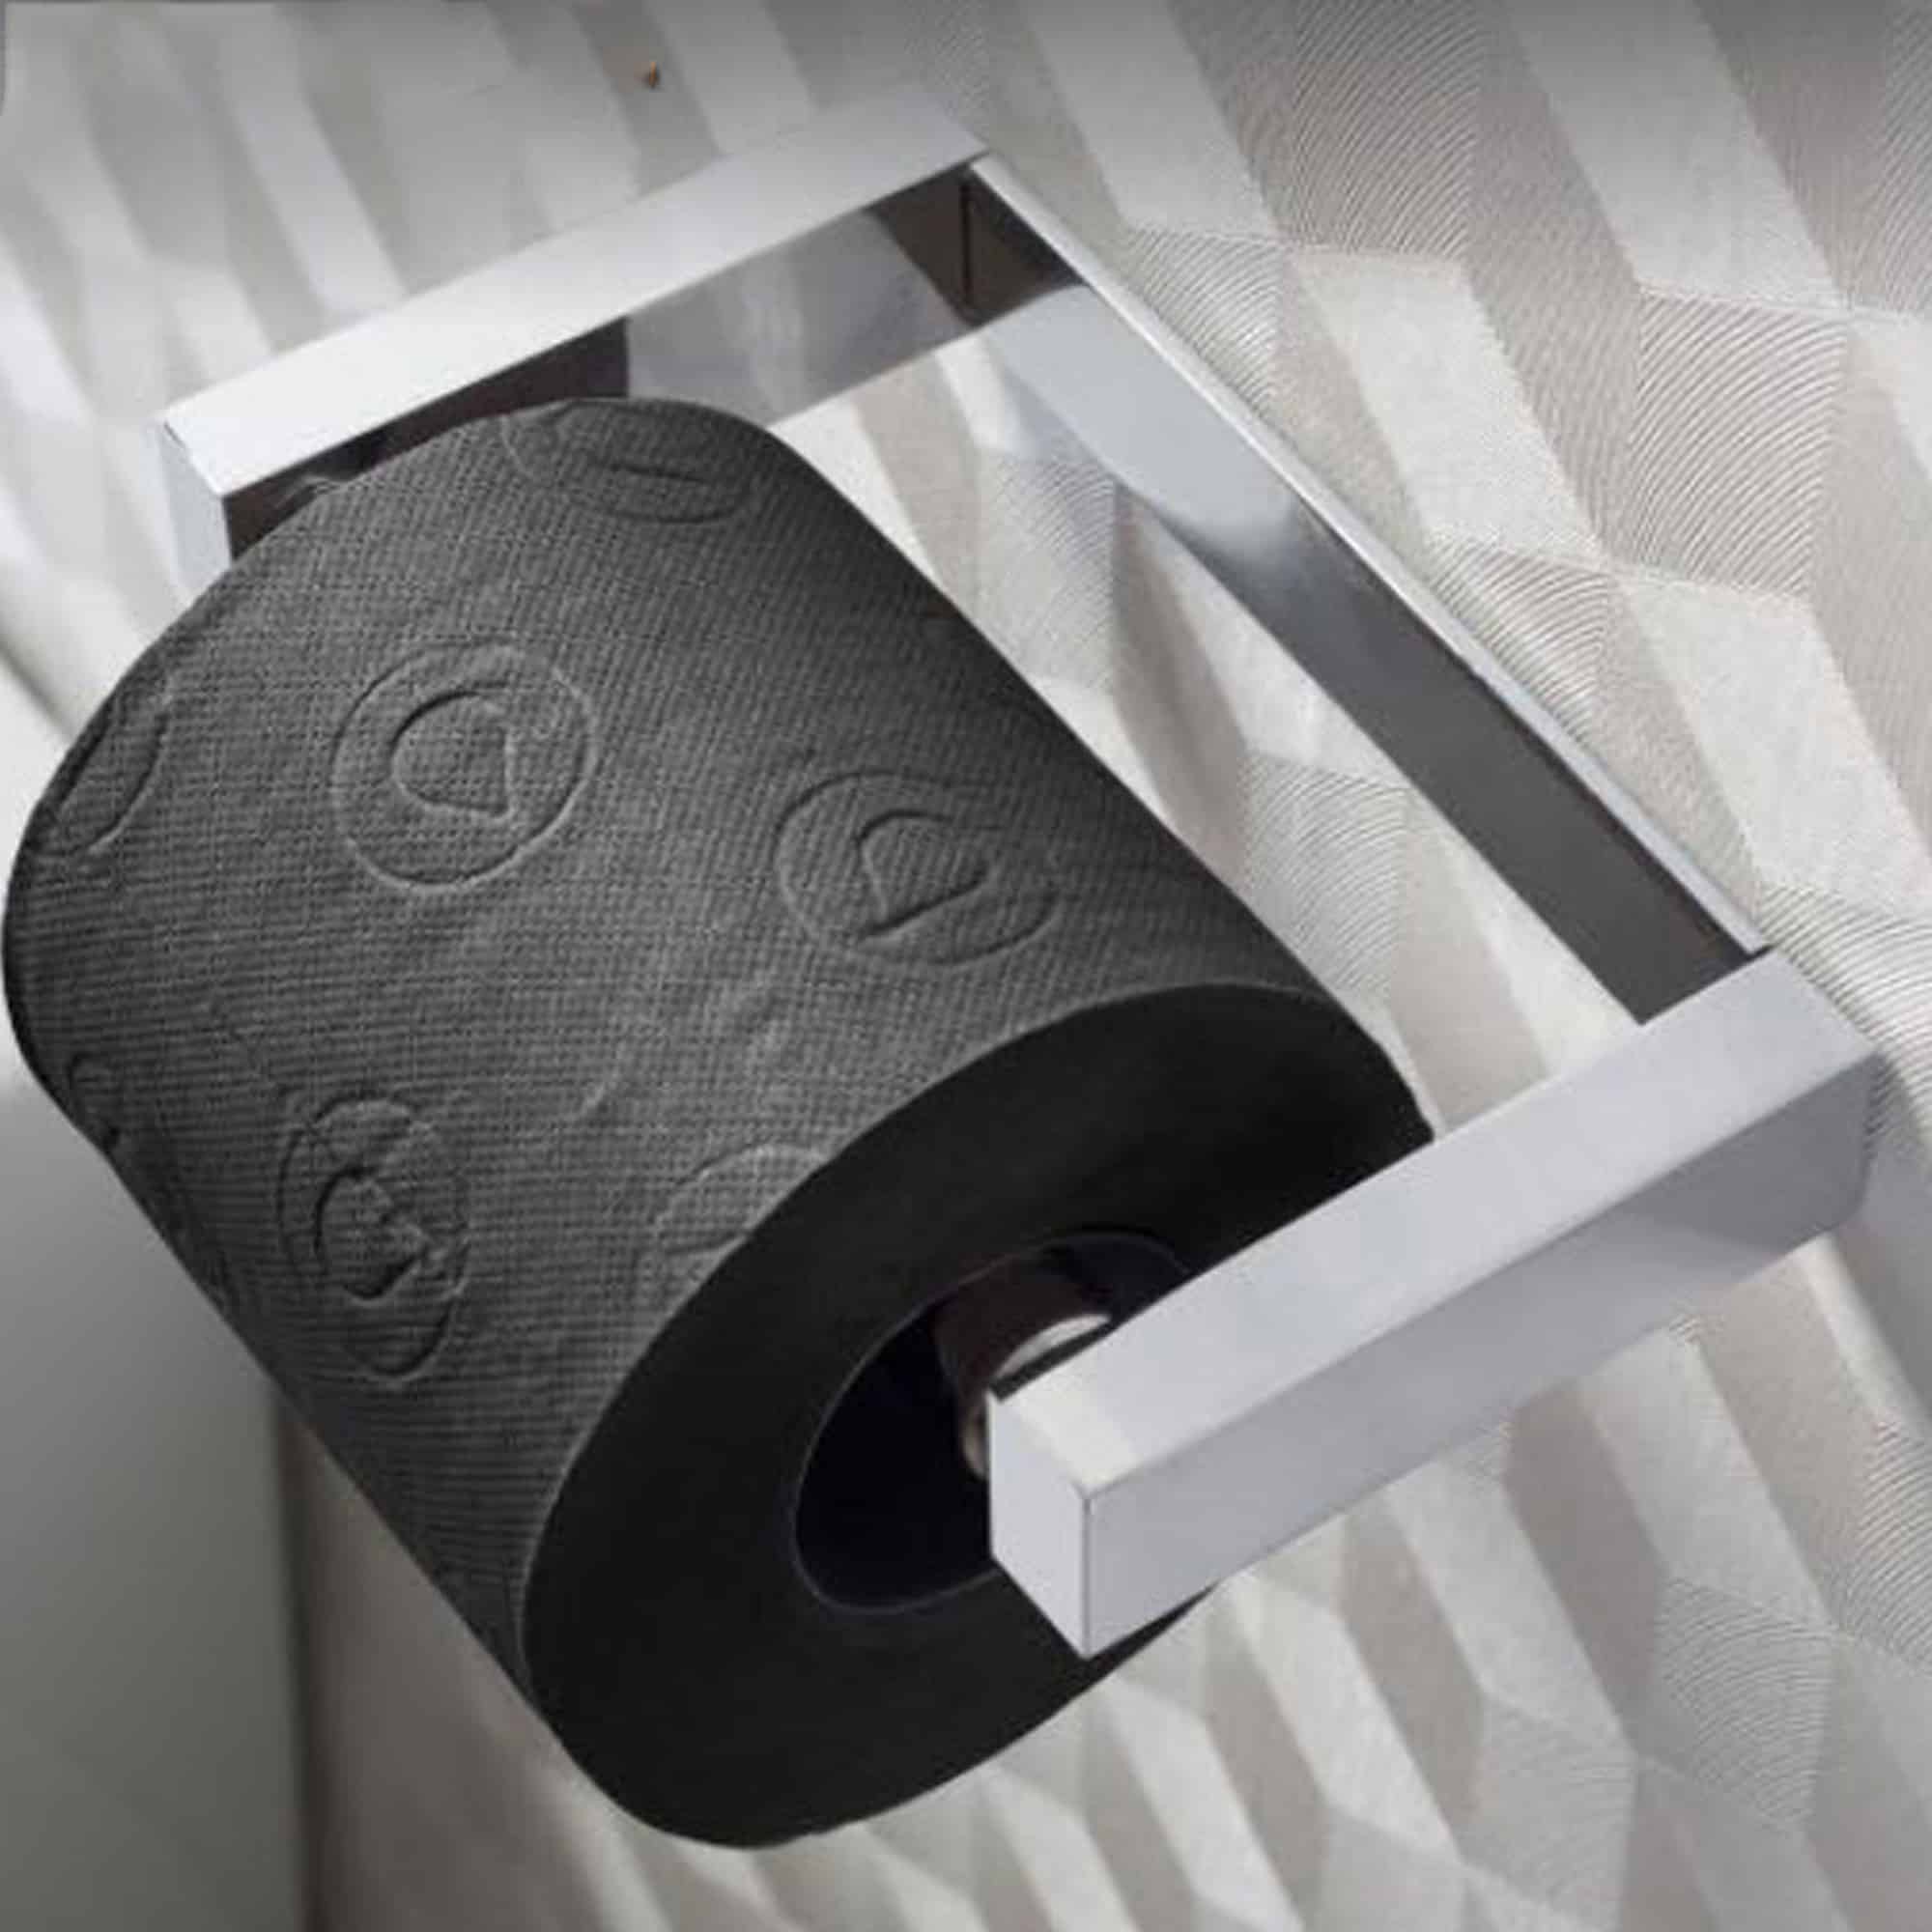 https://roll-lux.com/wp-content/uploads/2020/01/RB200066407-Black-Toilet-Paper-3-ply-Gift-Box-3-Rolls-pack-140-Premium-Quality-sheets-4.jpg